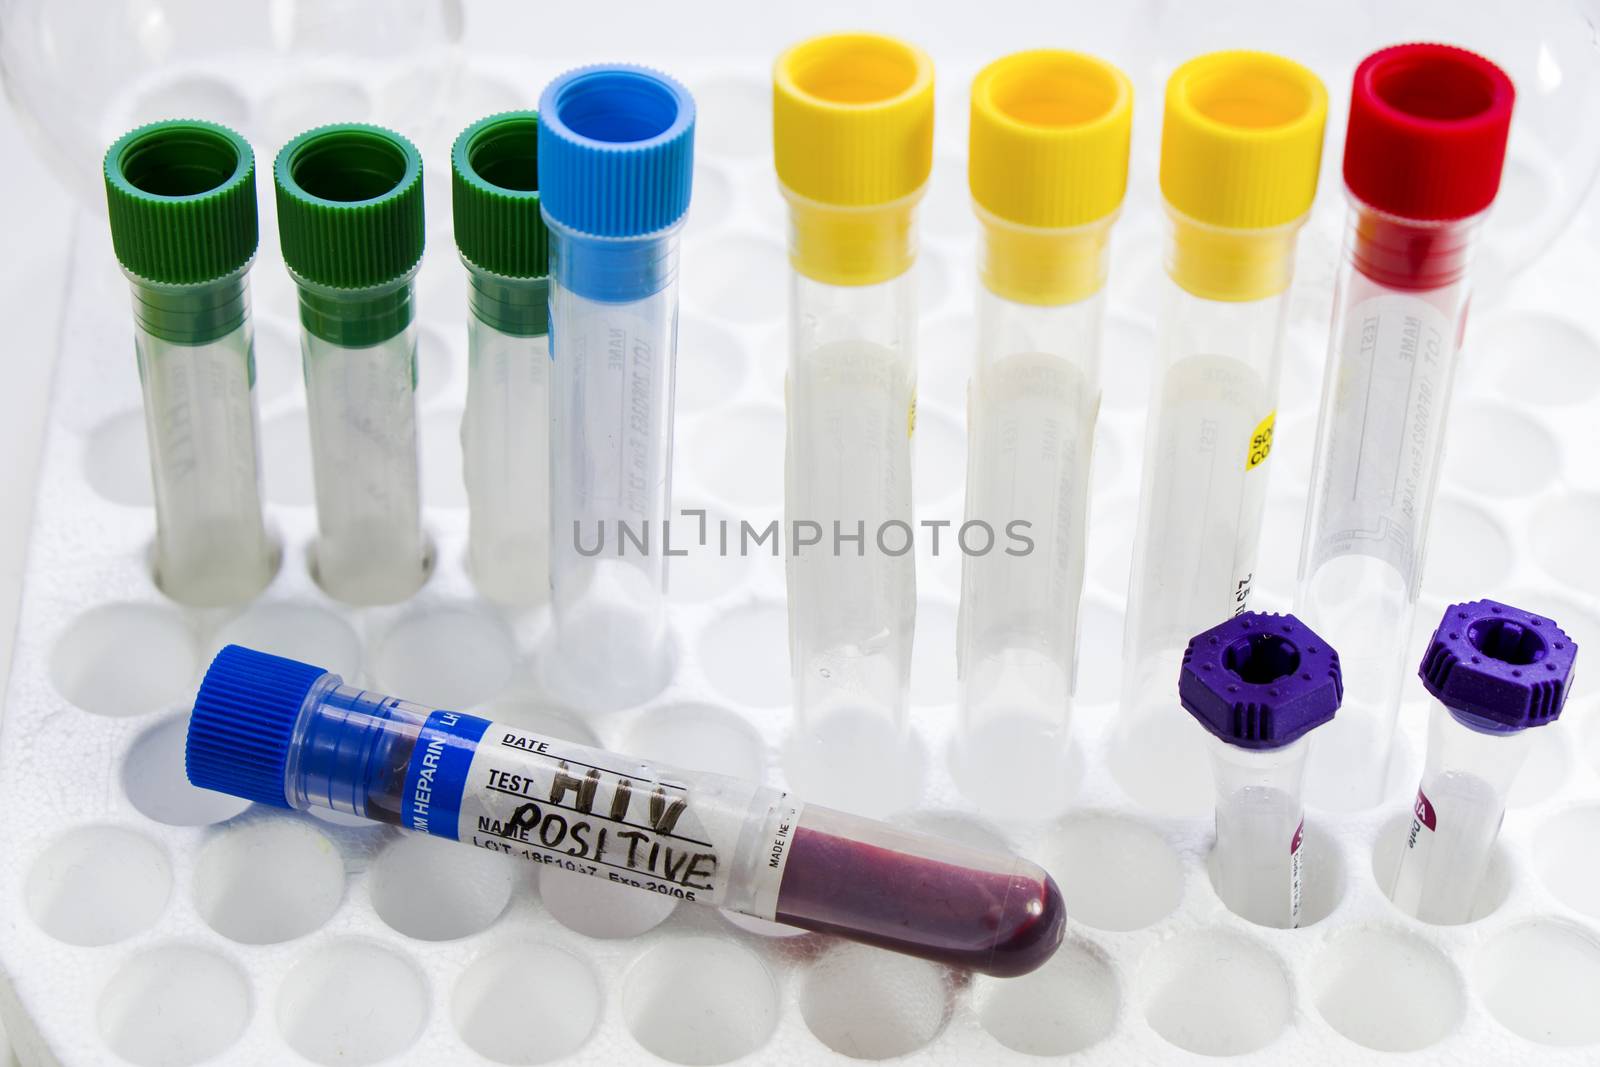 Hiv and aids infection blood test sample, diagnoses and laboratory chemical liquid elements by Taidundua